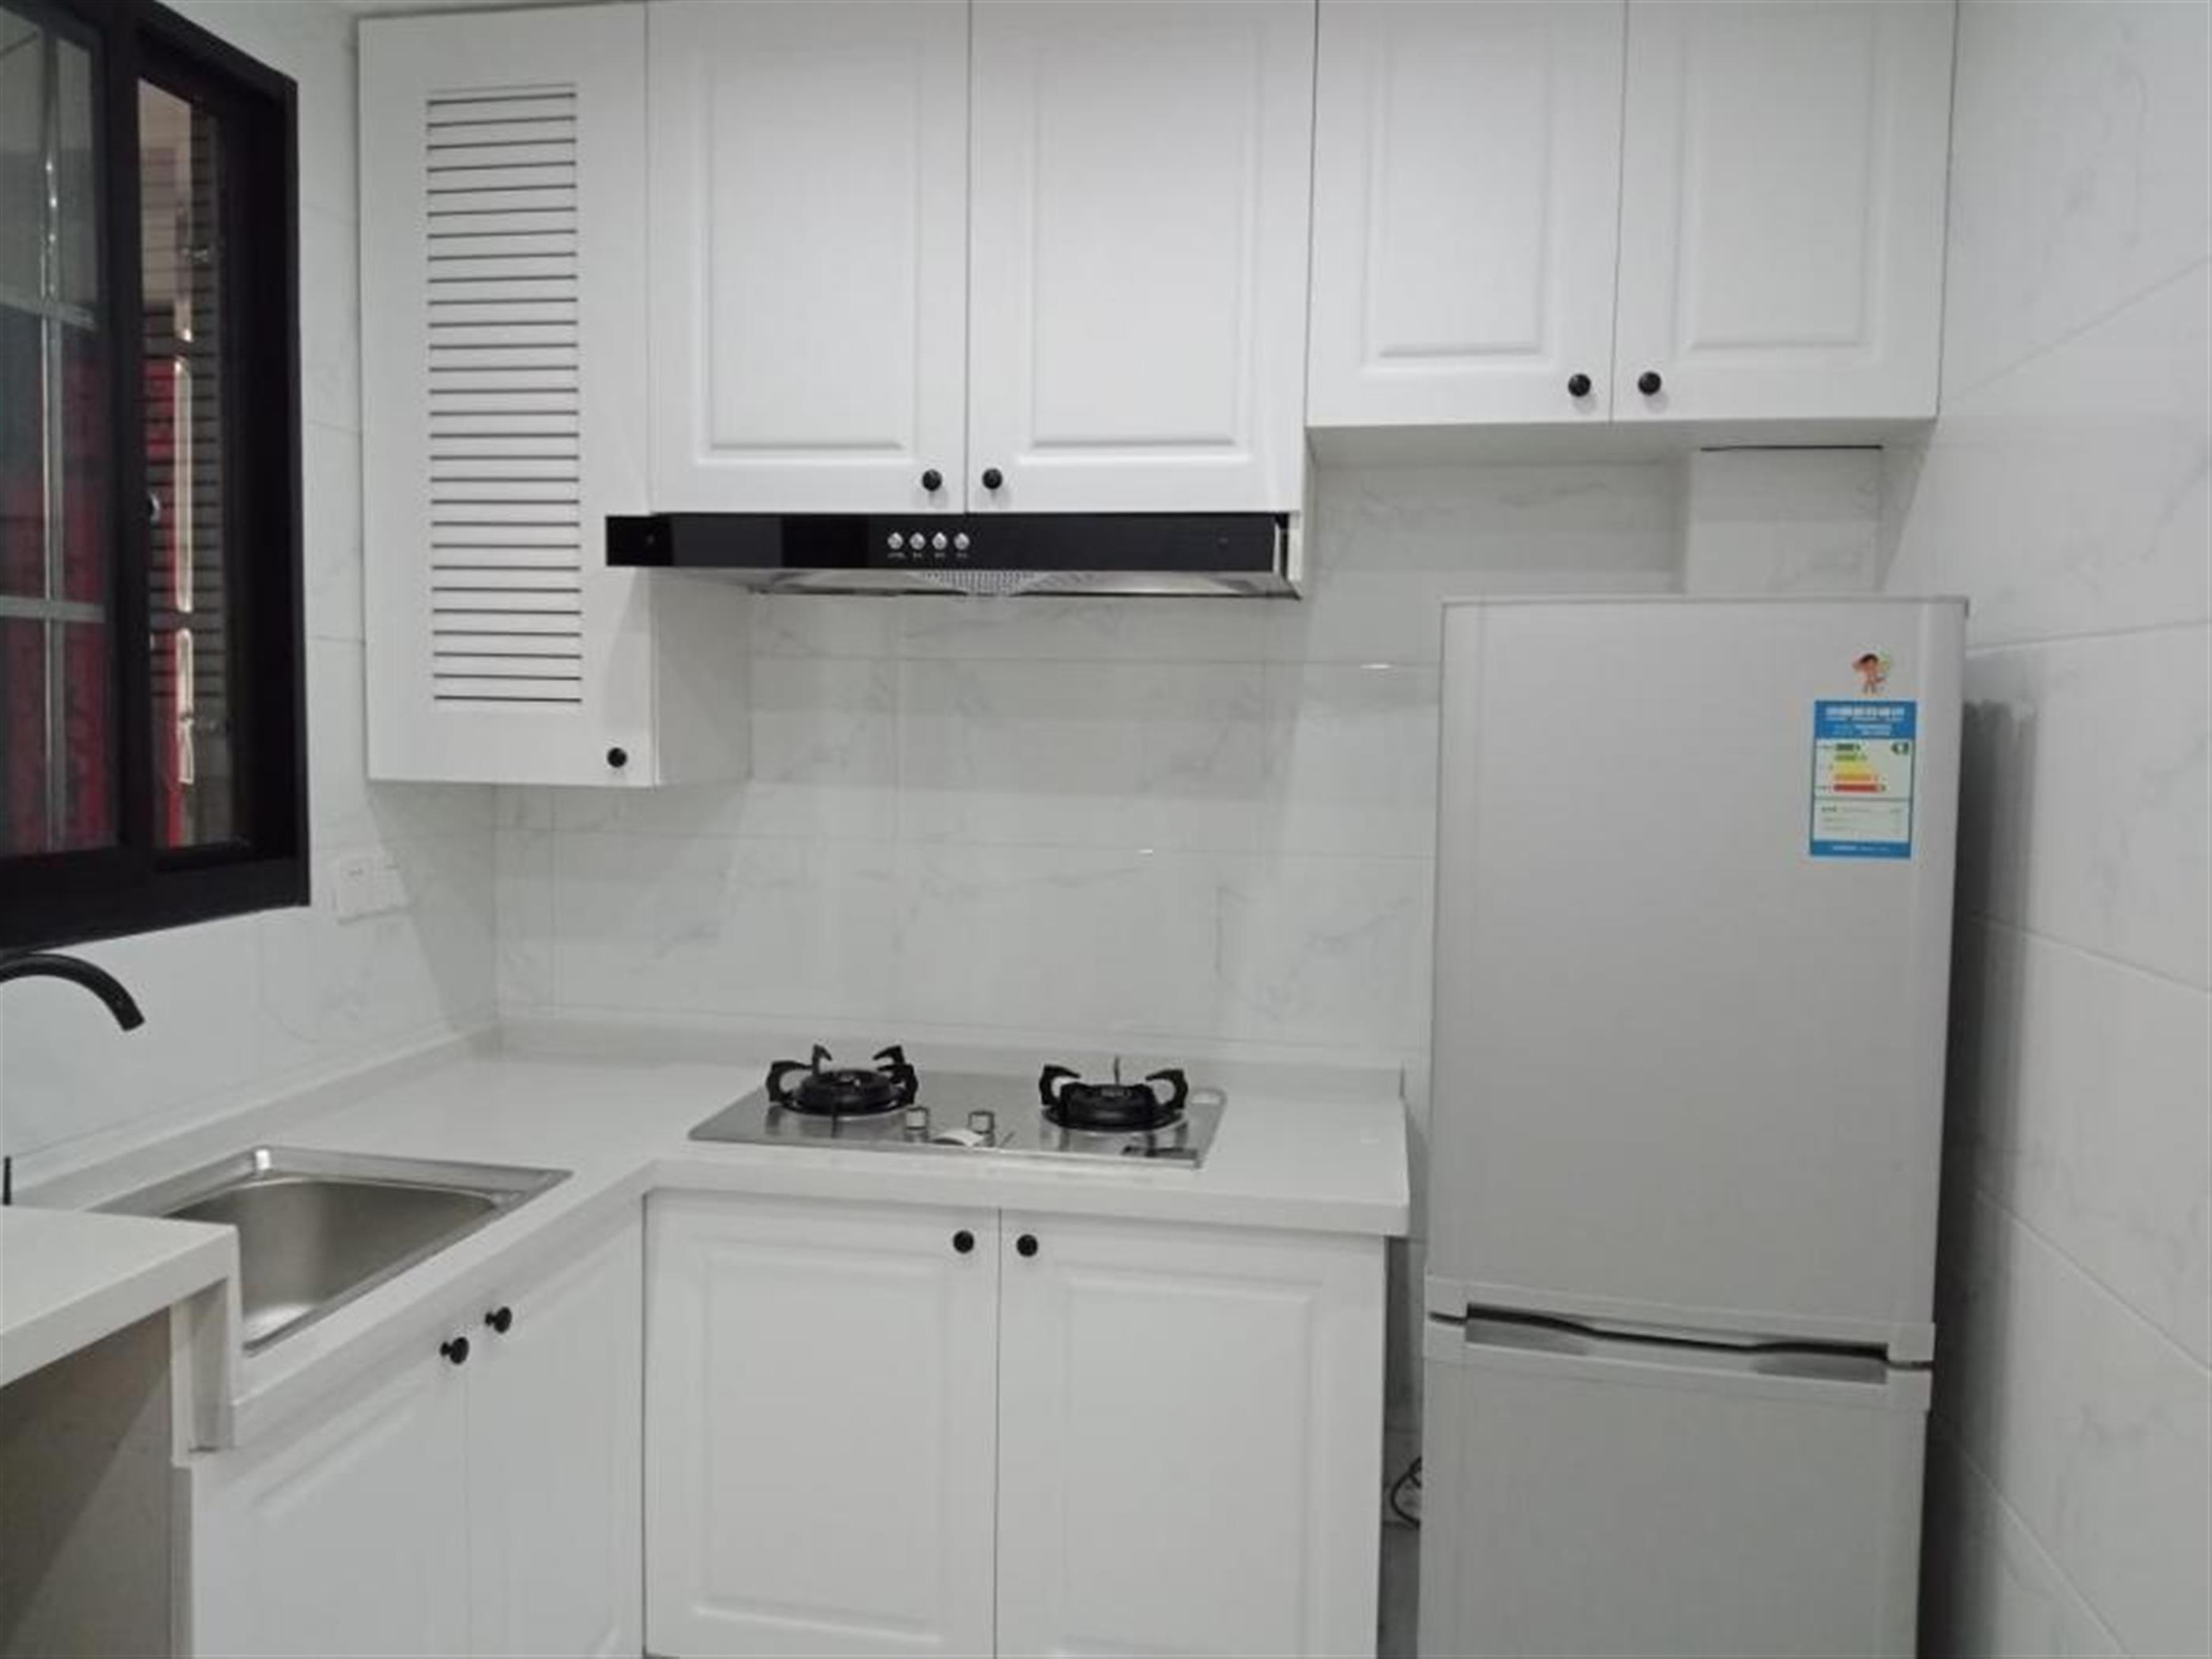 clean kitchen Renovated Cozy Budget 1BR Apt nr Jiangsu Rd LN2/11 for Rent in Shanghai